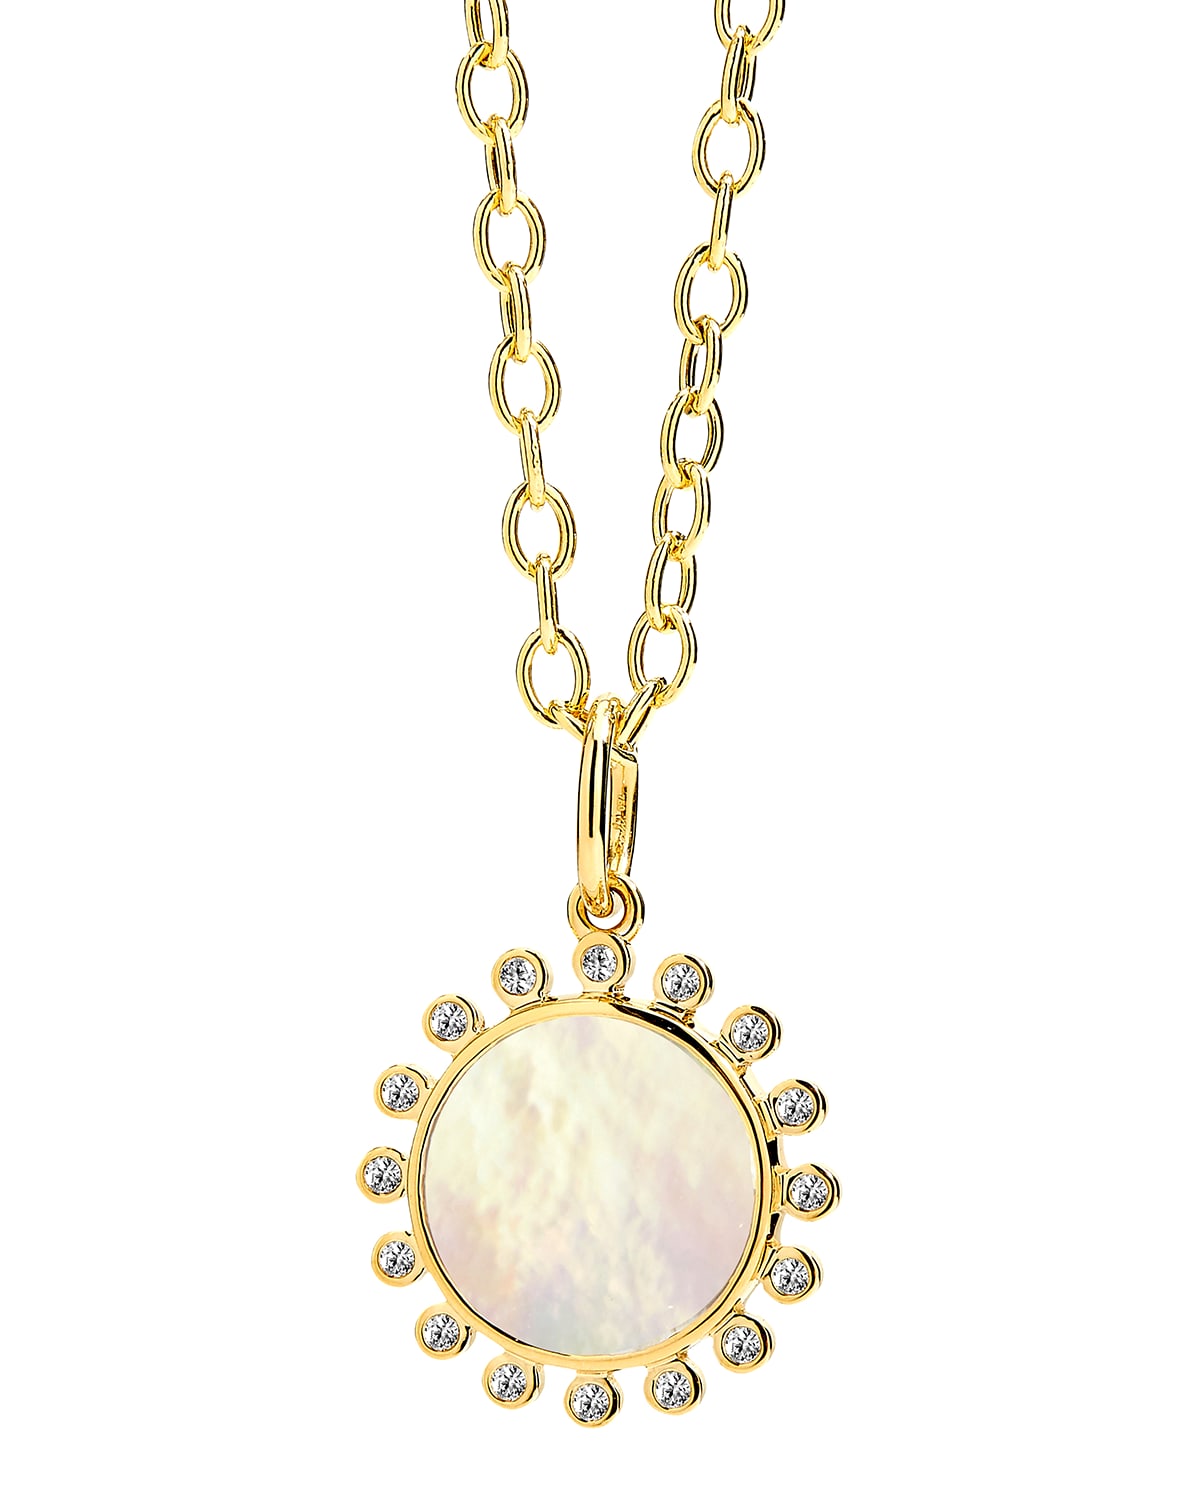 SYNA 18K YELLOW GOLD MOTHER-OF-PEARL AND DIAMOND PENDANT NECKLACE